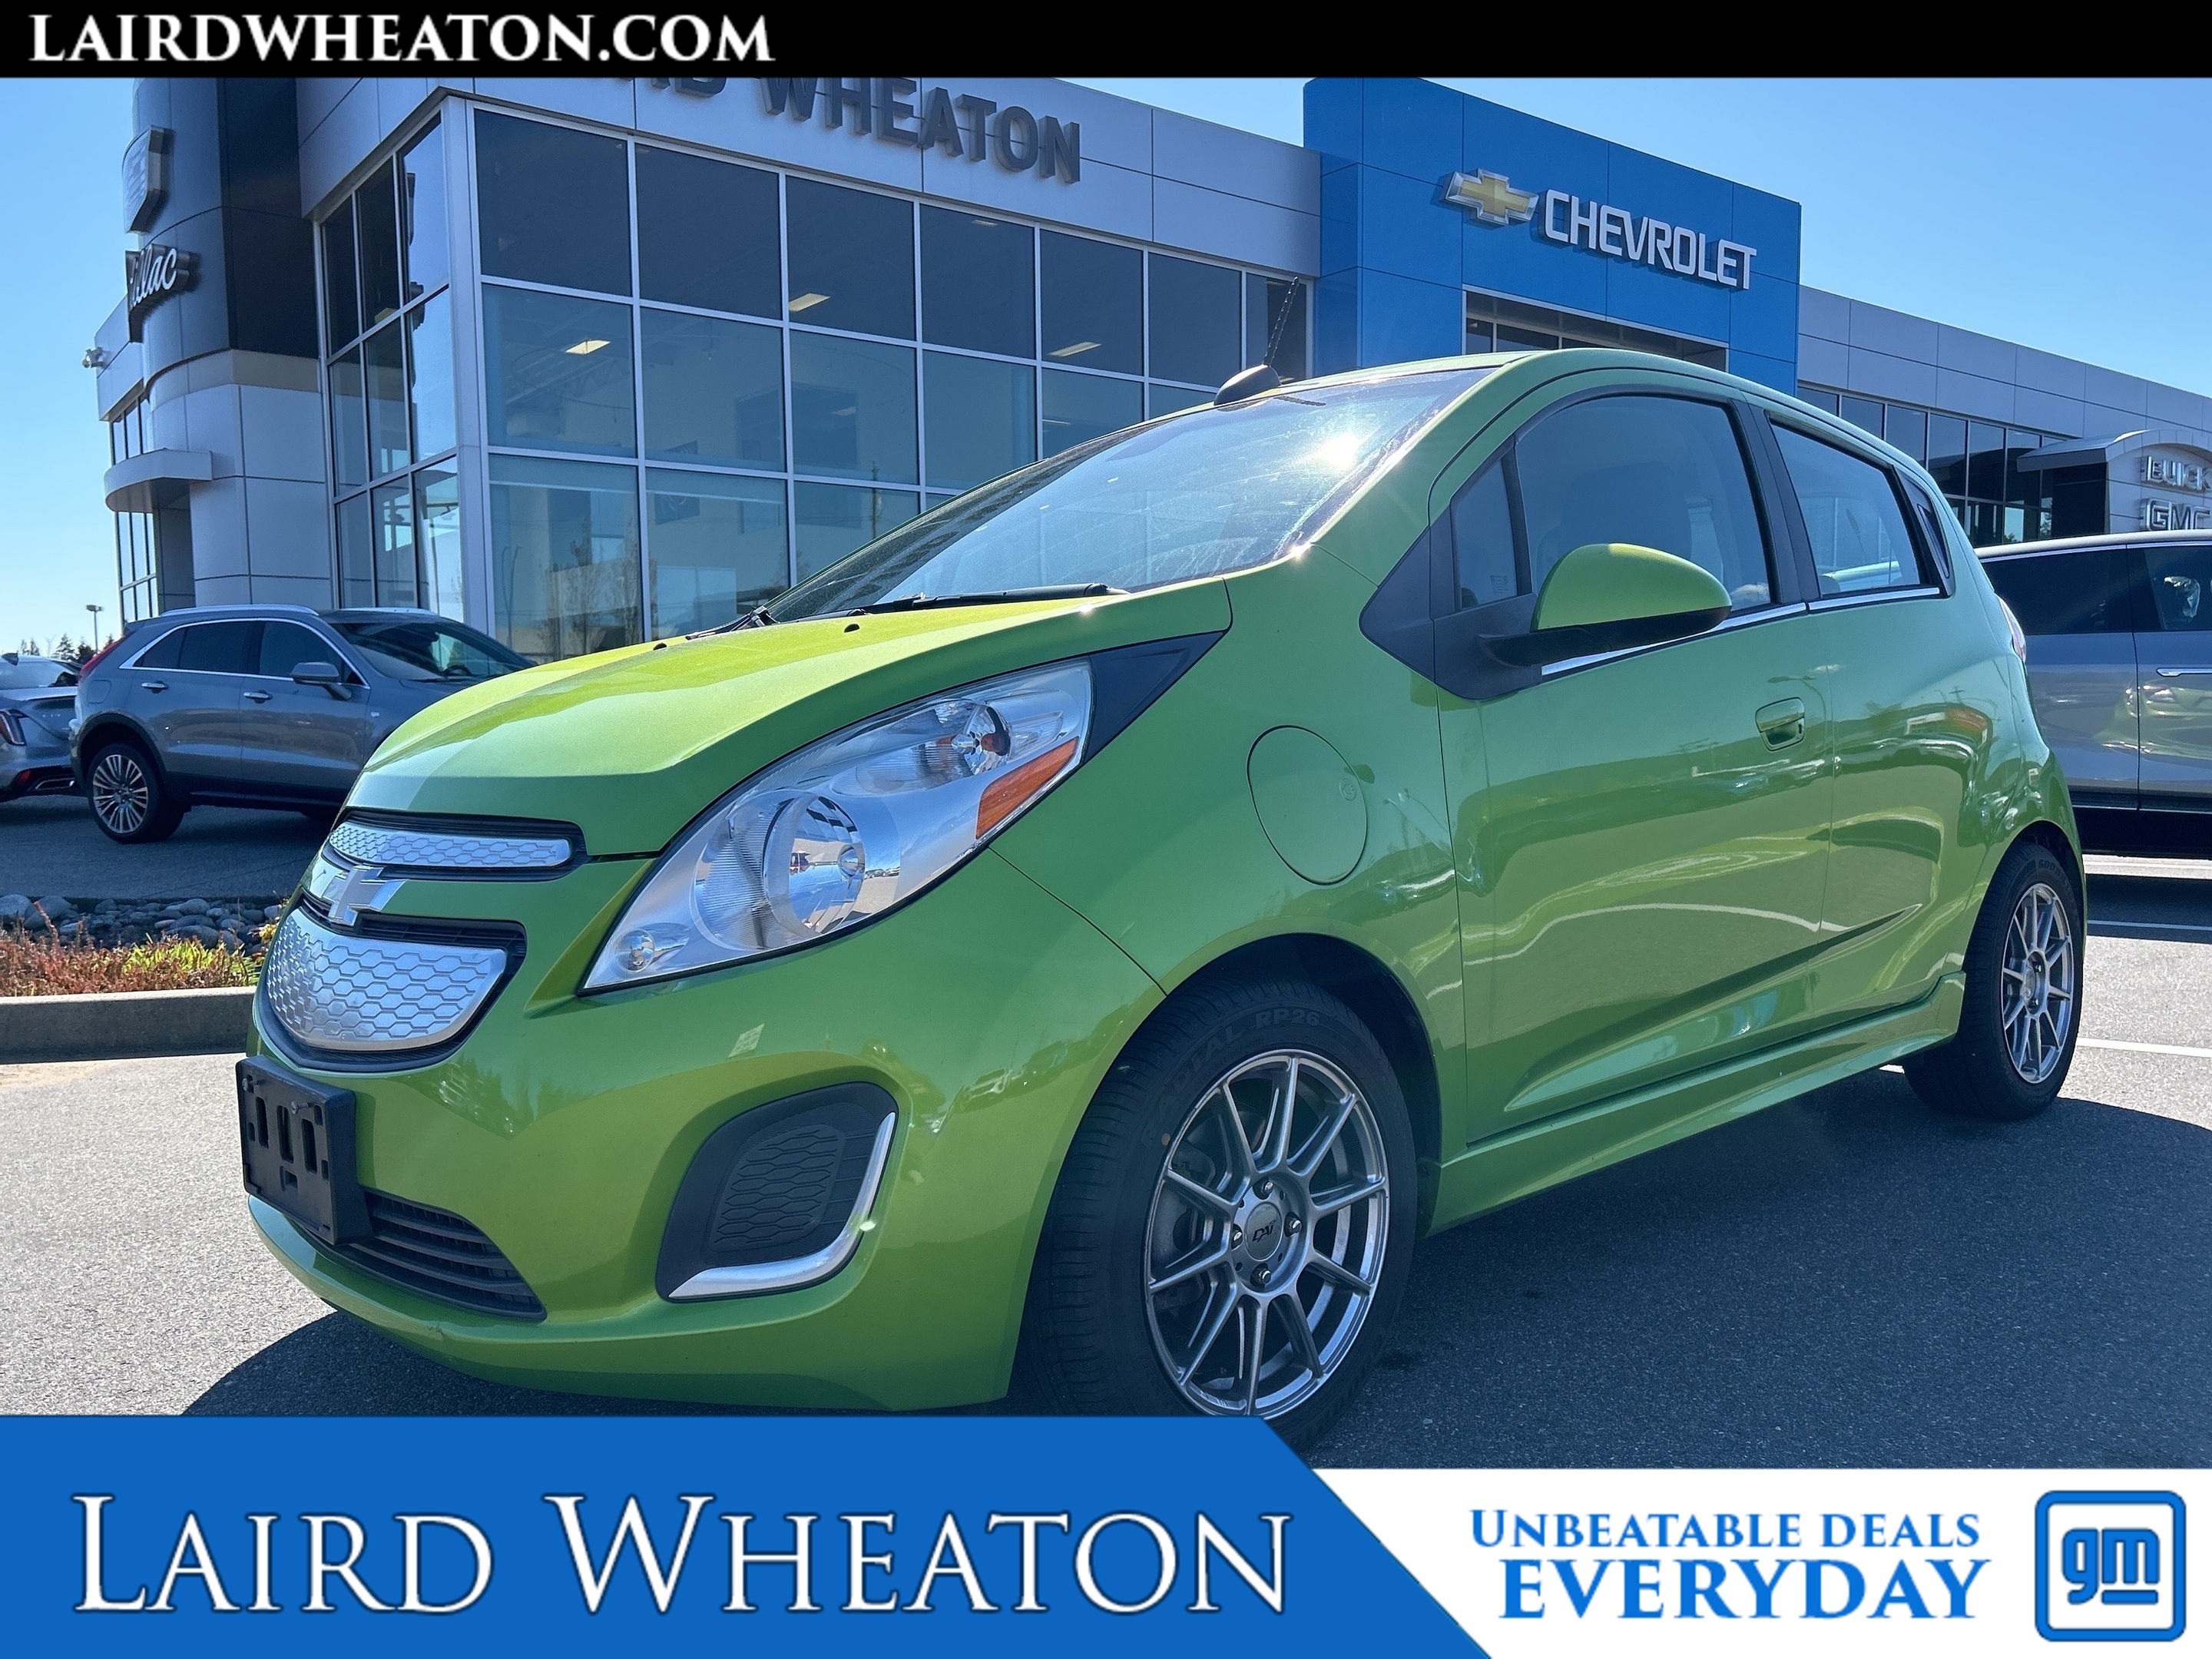 2016 Chevrolet Spark EV LT, All Electric, Heated Seats, Remote Start